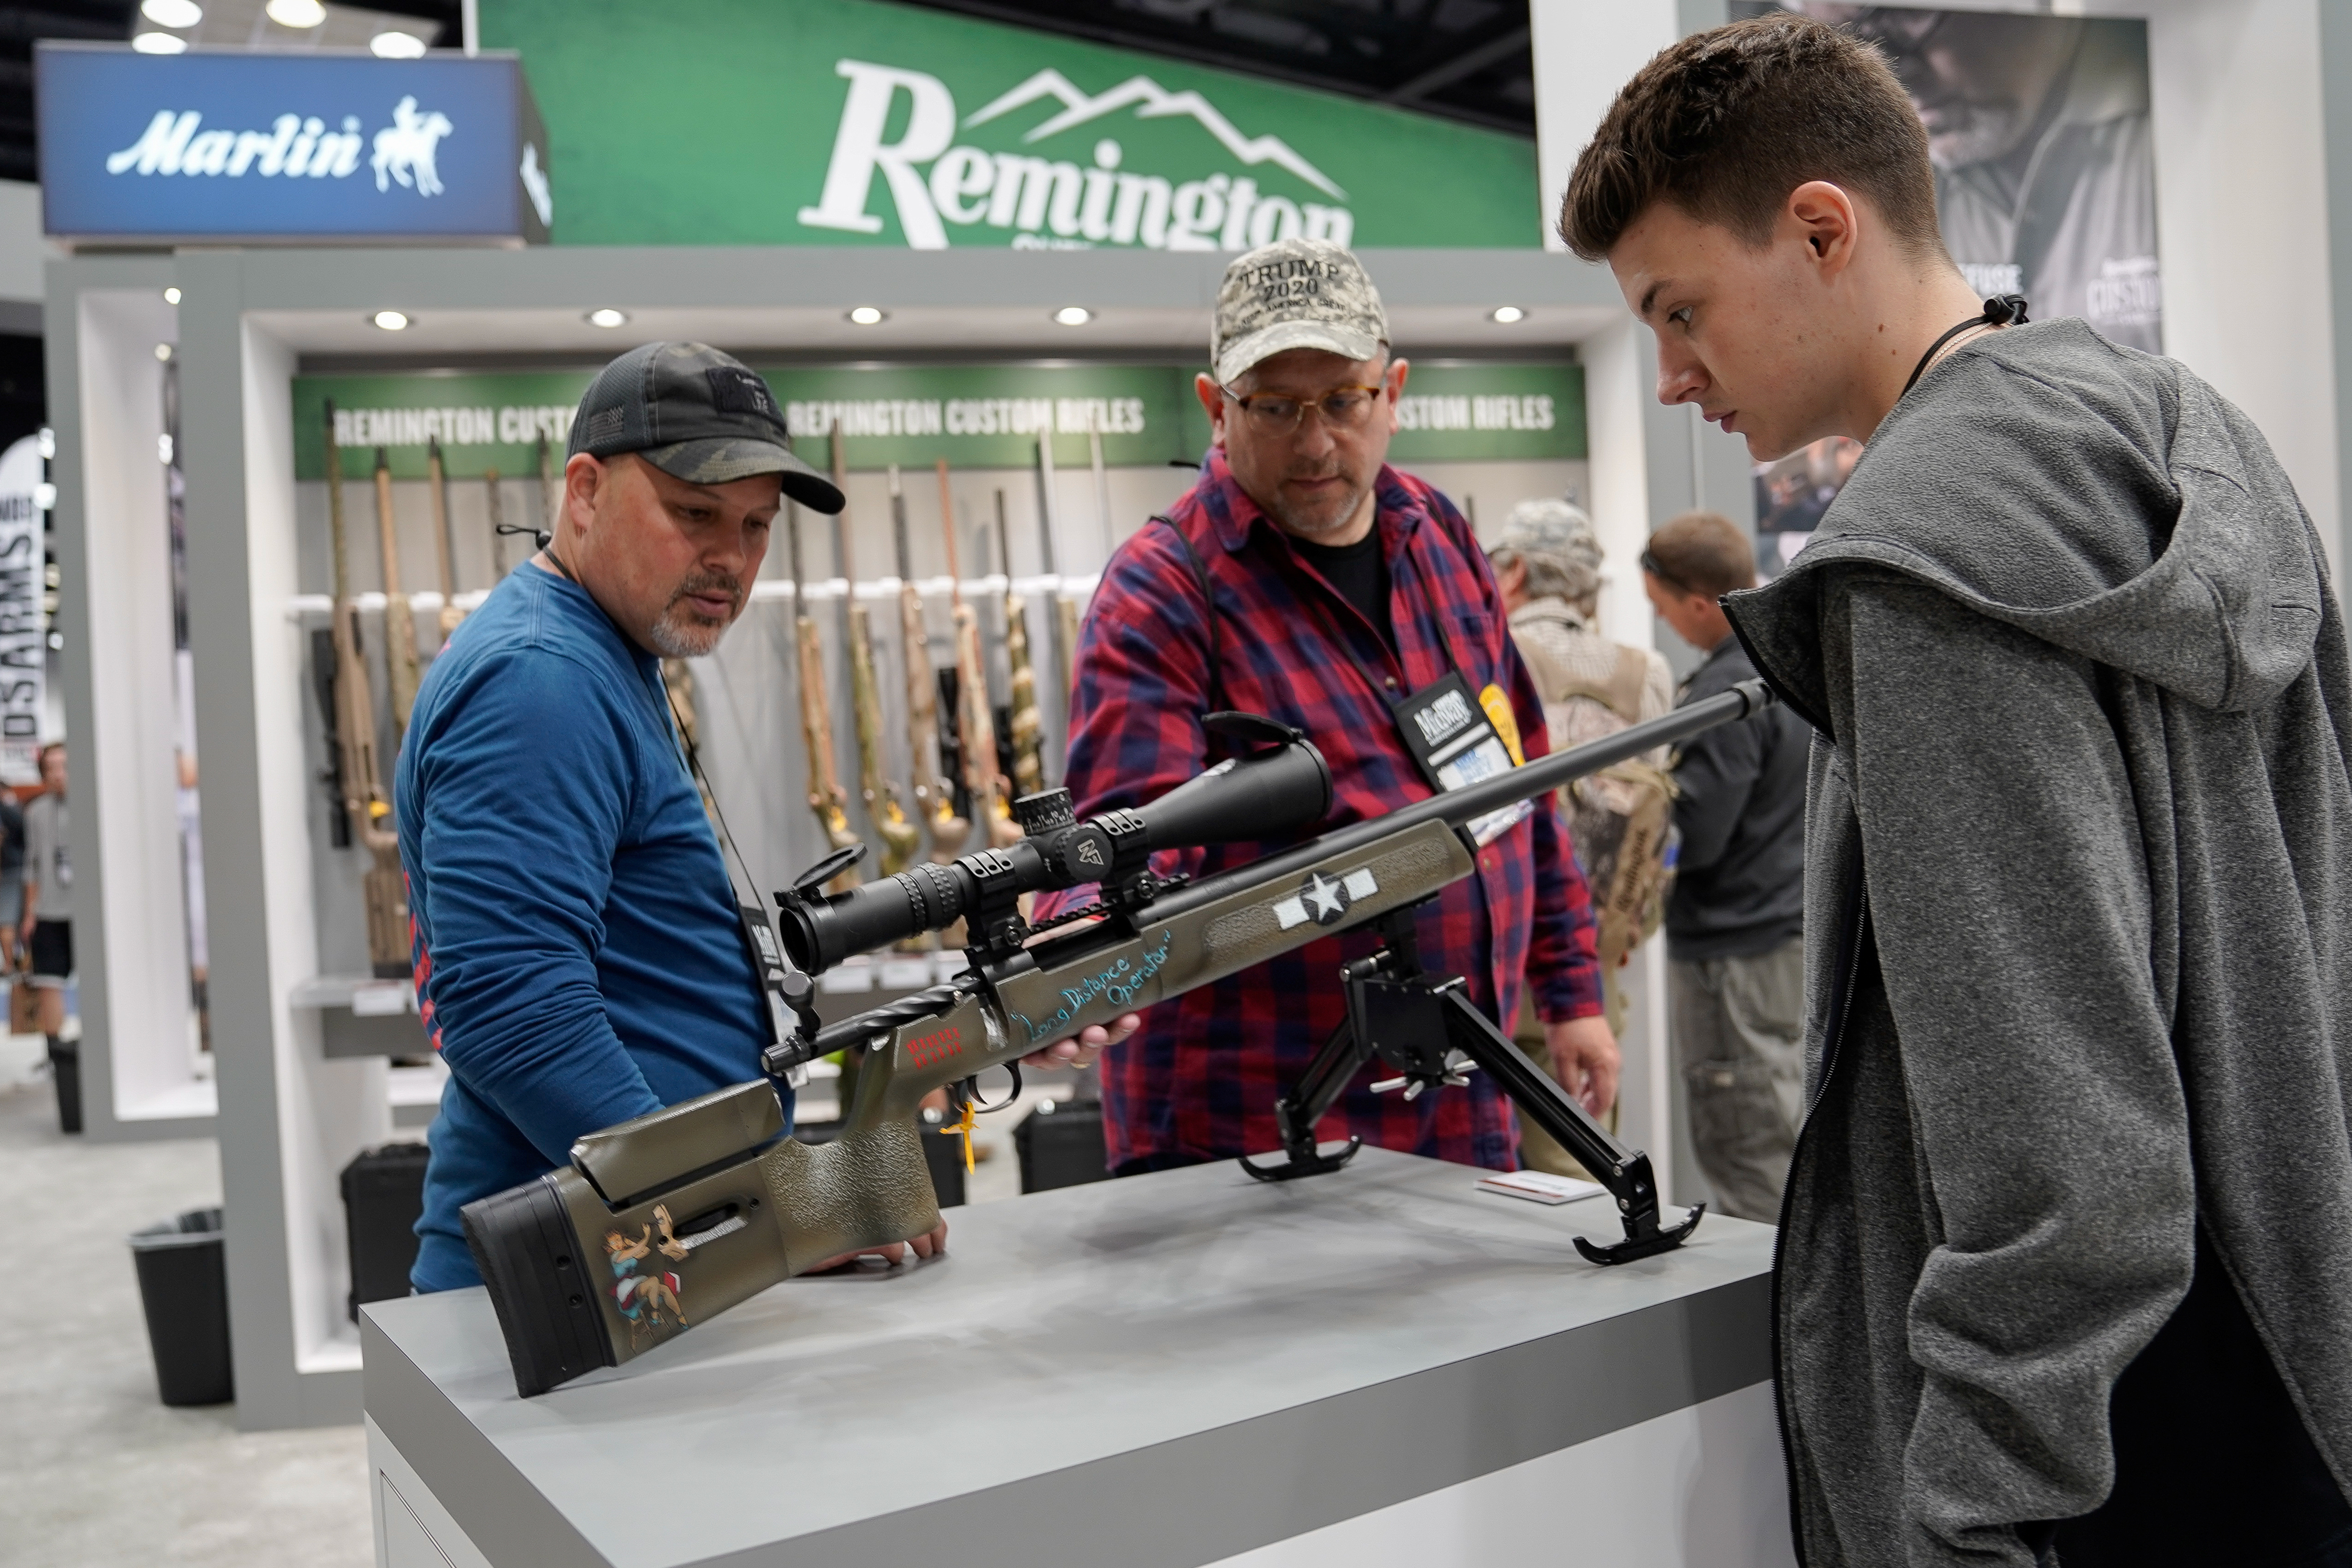 Attendees examine a Remington rifle at the National Rifle Association's (NRA) annual meeting, in Indianapolis, Indiana